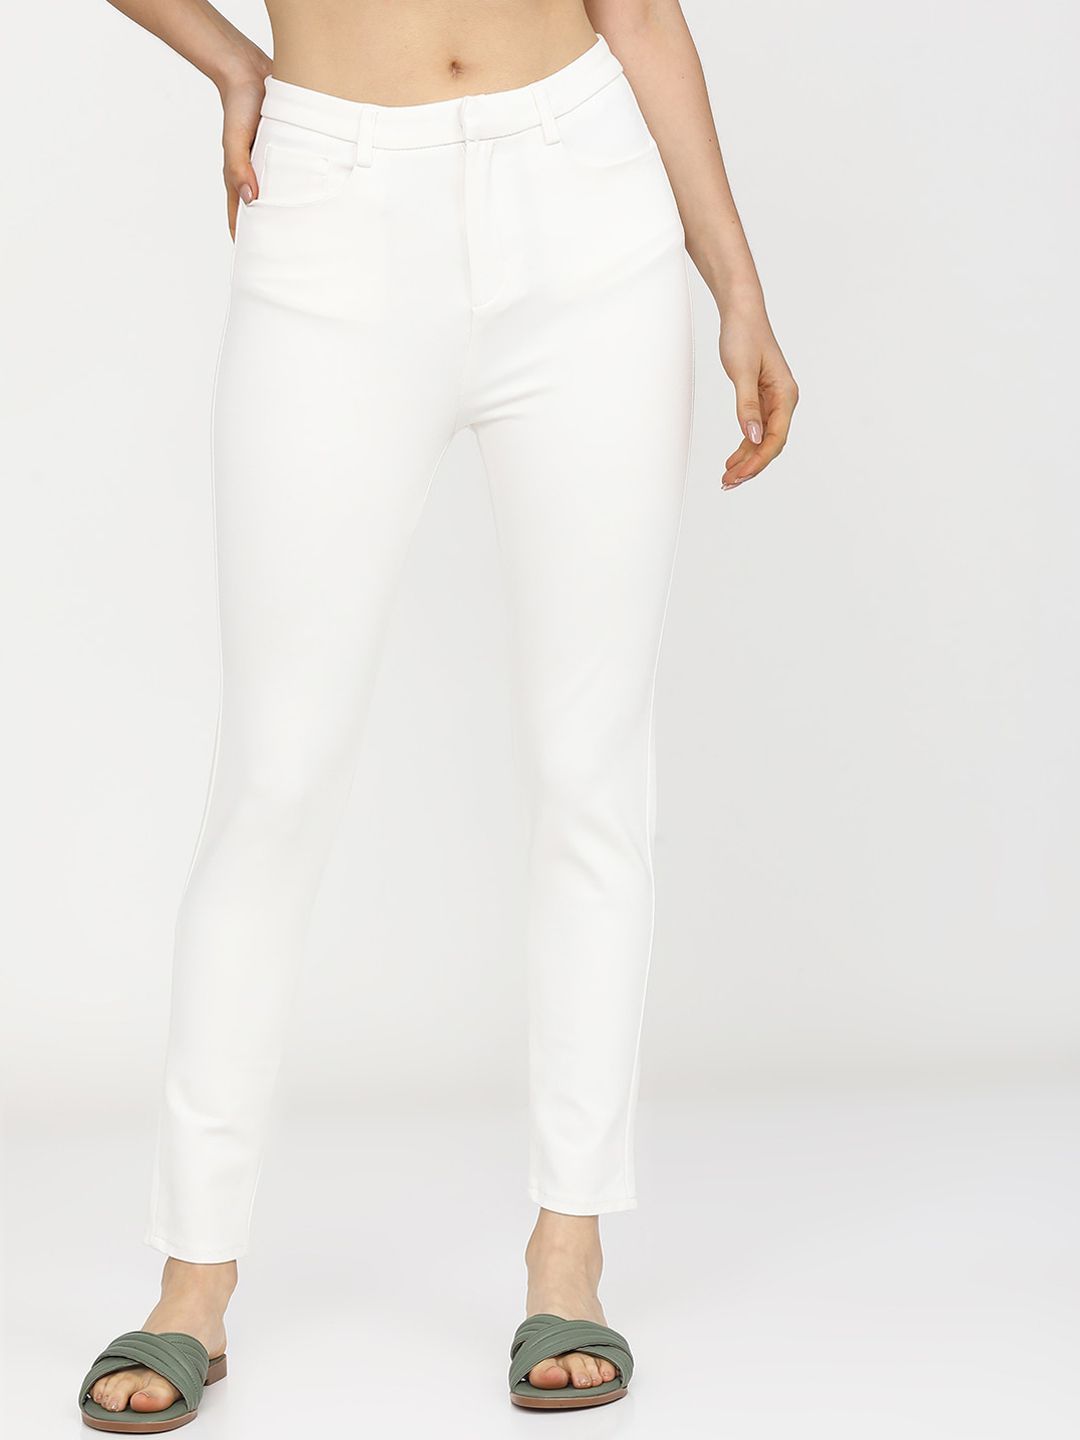 Tokyo Talkies Women Off White Slim Fit Trousers Price in India